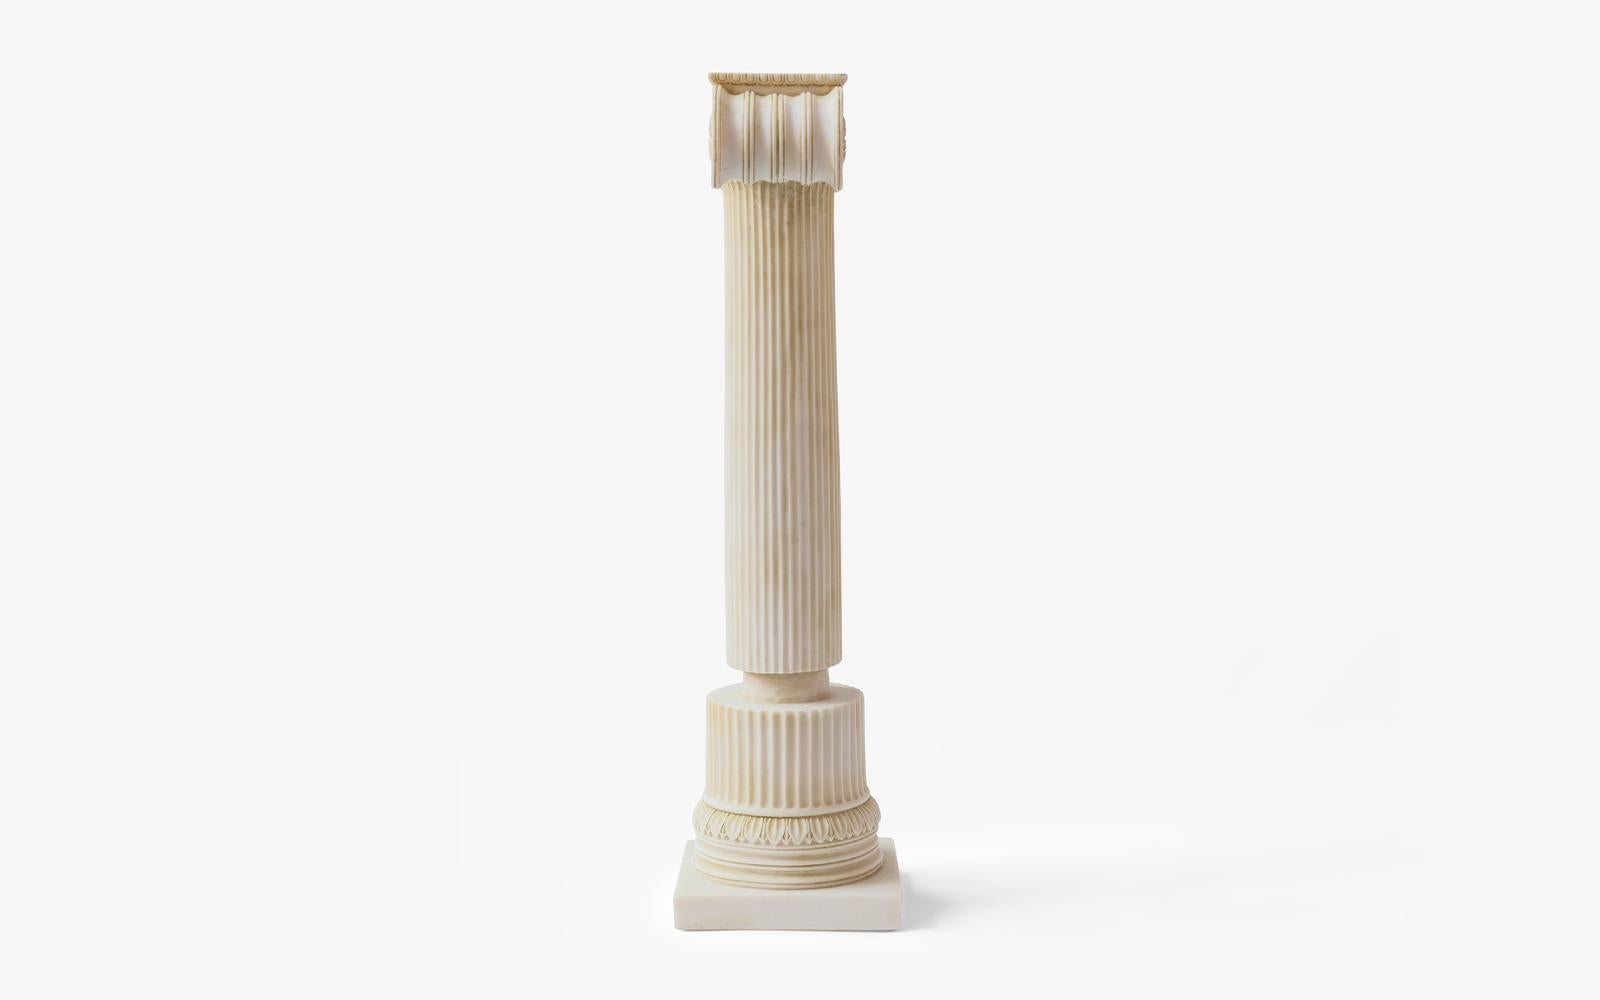 Weight: 6,5 kg
Ionic regular columns, born on the western and southern coasts of Anatolia, have a thin, long and elegant form.

Lagu's special selection brings the most important sculptures of world history to your living spaces with the best